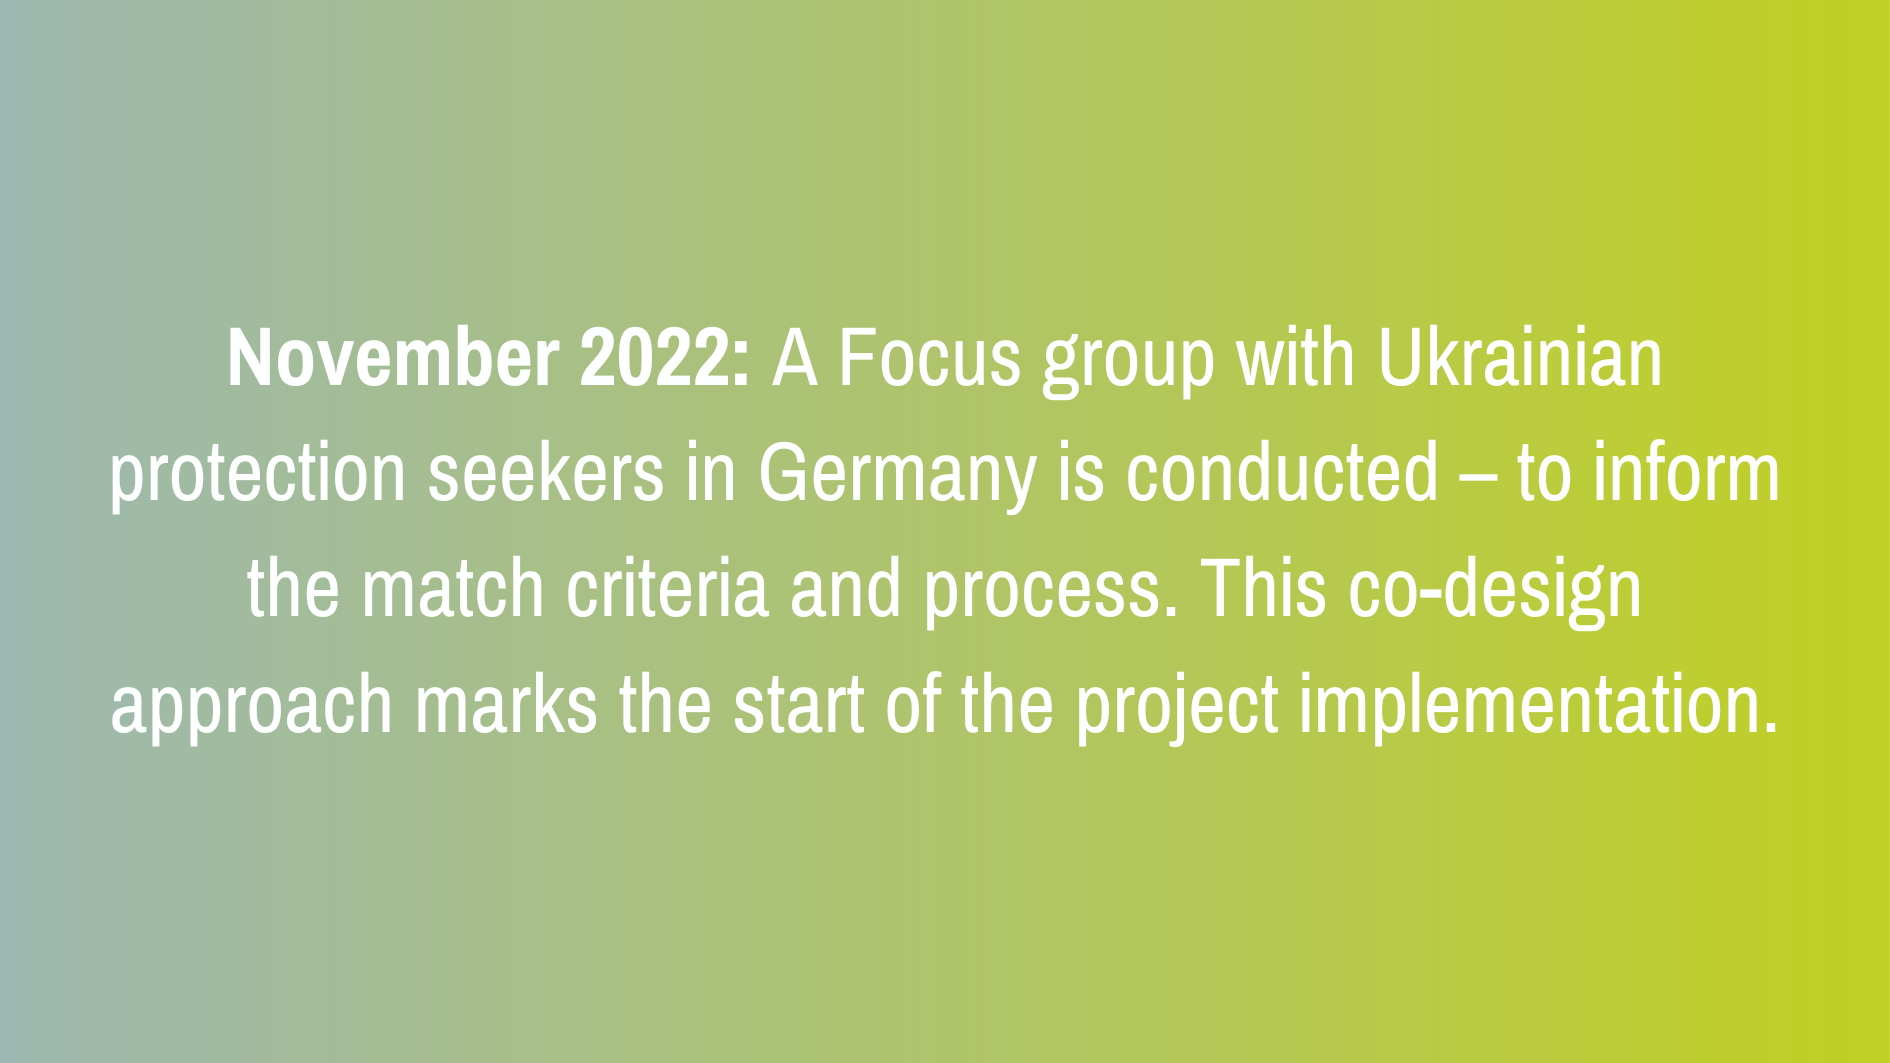 November 2022: A Focus group with Ukrainian protection seekers in Germany is conducted – to inform the match criteria and process. This co-design approach marks the start of the project implementation.